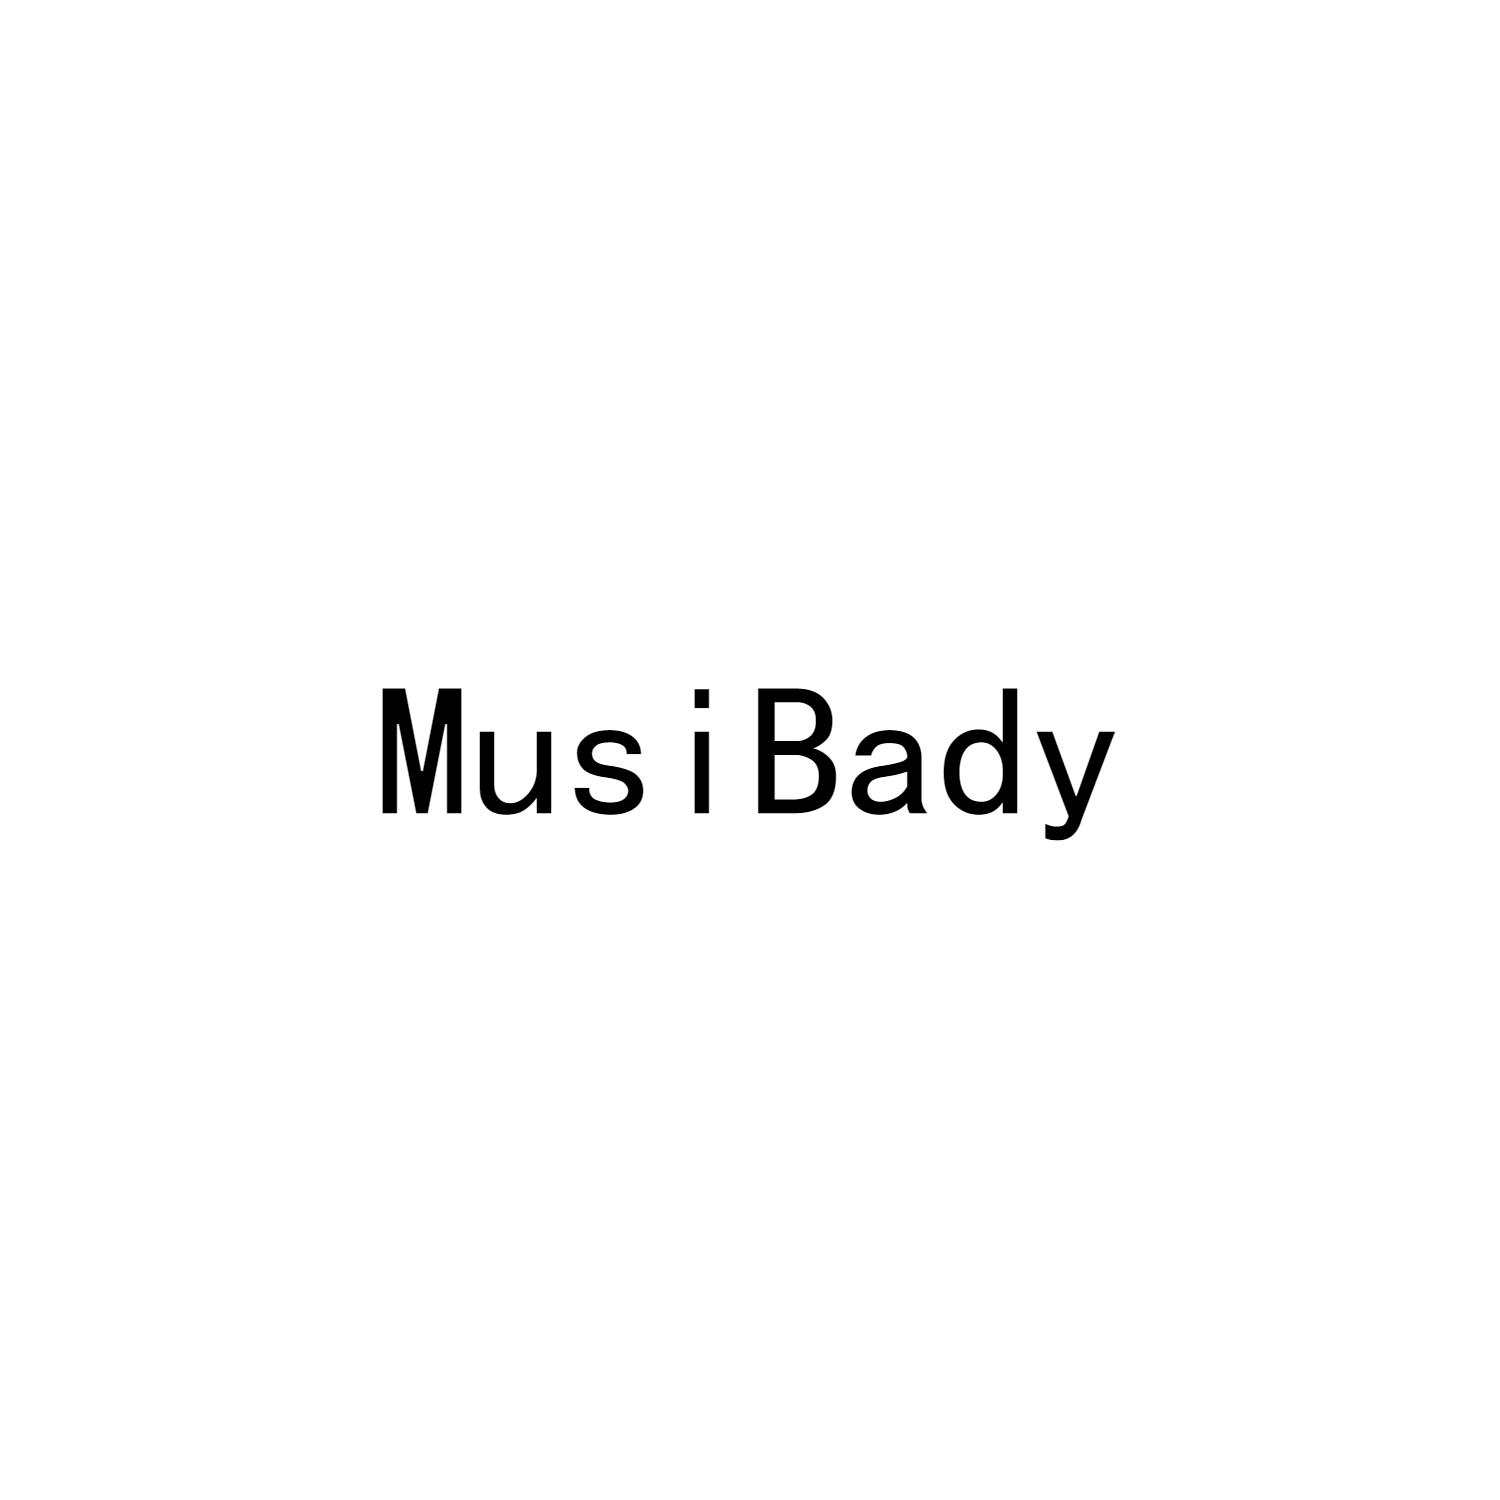 MUSIBABY